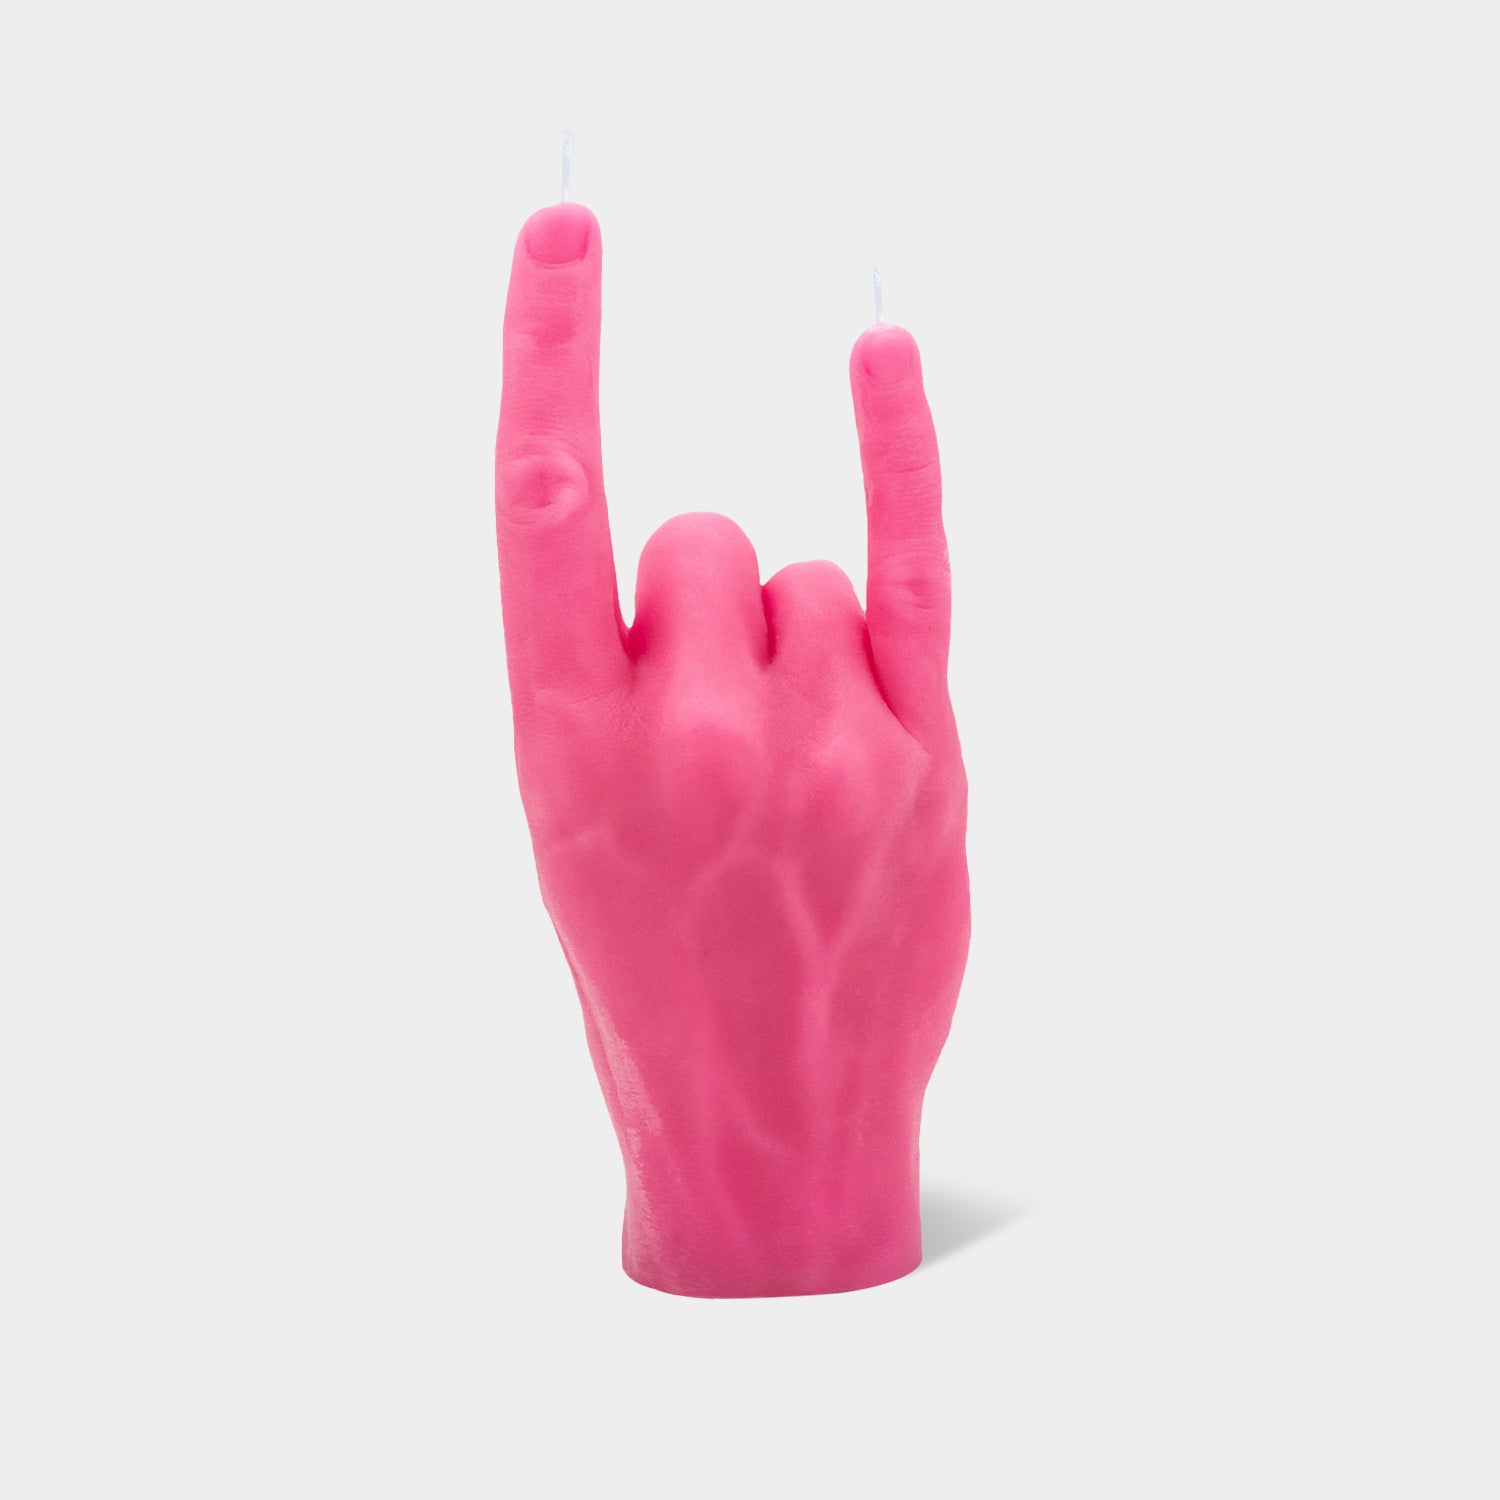 CandleHand "You Rock" Candle - Pink